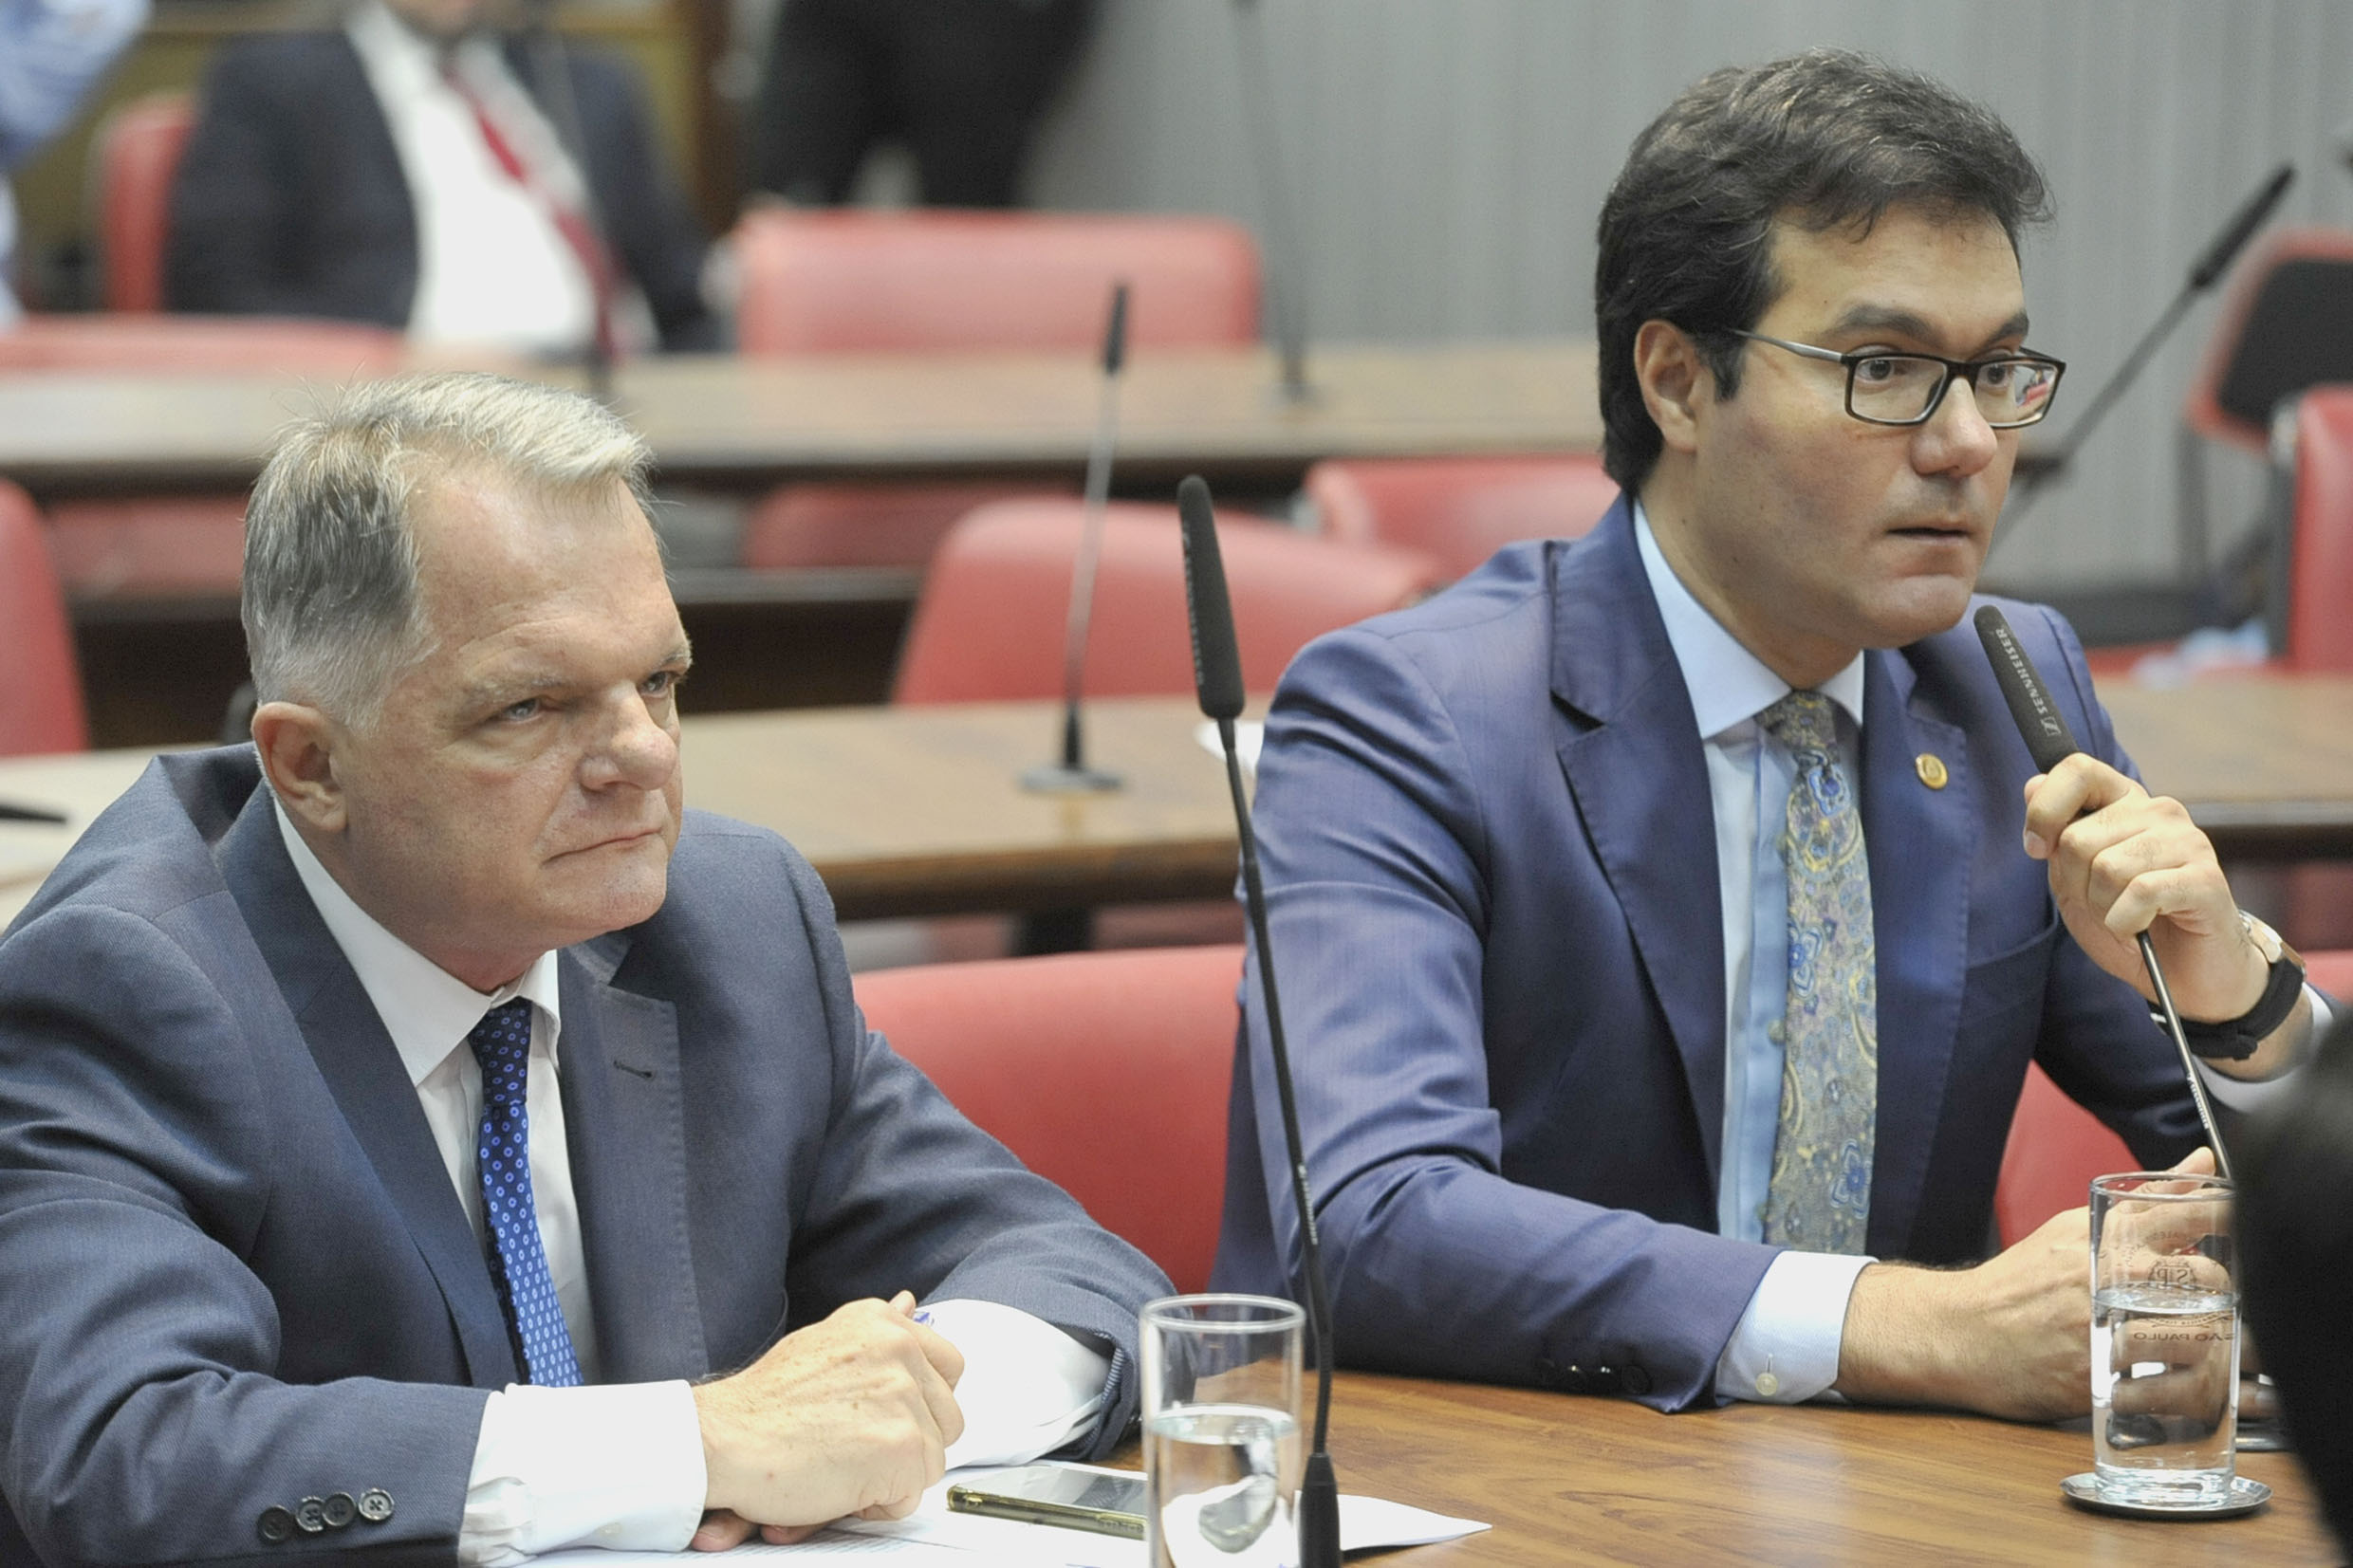 Parlamentares na comissão<a style='float:right' href='https://www3.al.sp.gov.br/repositorio/noticia/N-04-2019/fg233422.jpg' target=_blank><img src='/_img/material-file-download-white.png' width='14px' alt='Clique para baixar a imagem'></a>